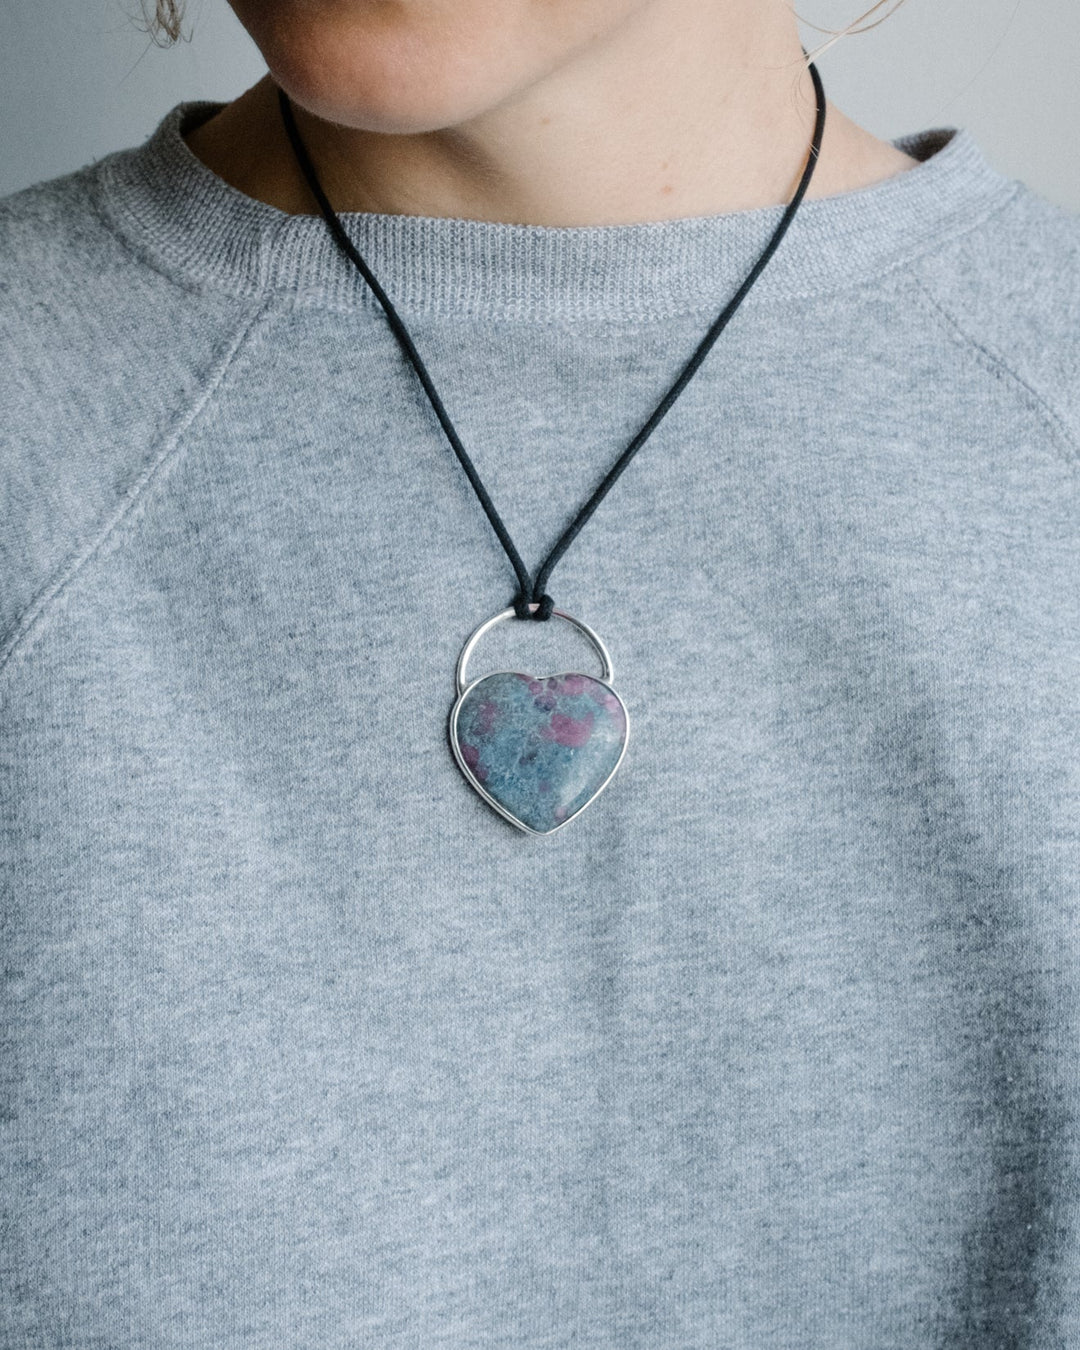 Rainbow Fluroite Heart Sterling Silver Necklace - The Healing Pear